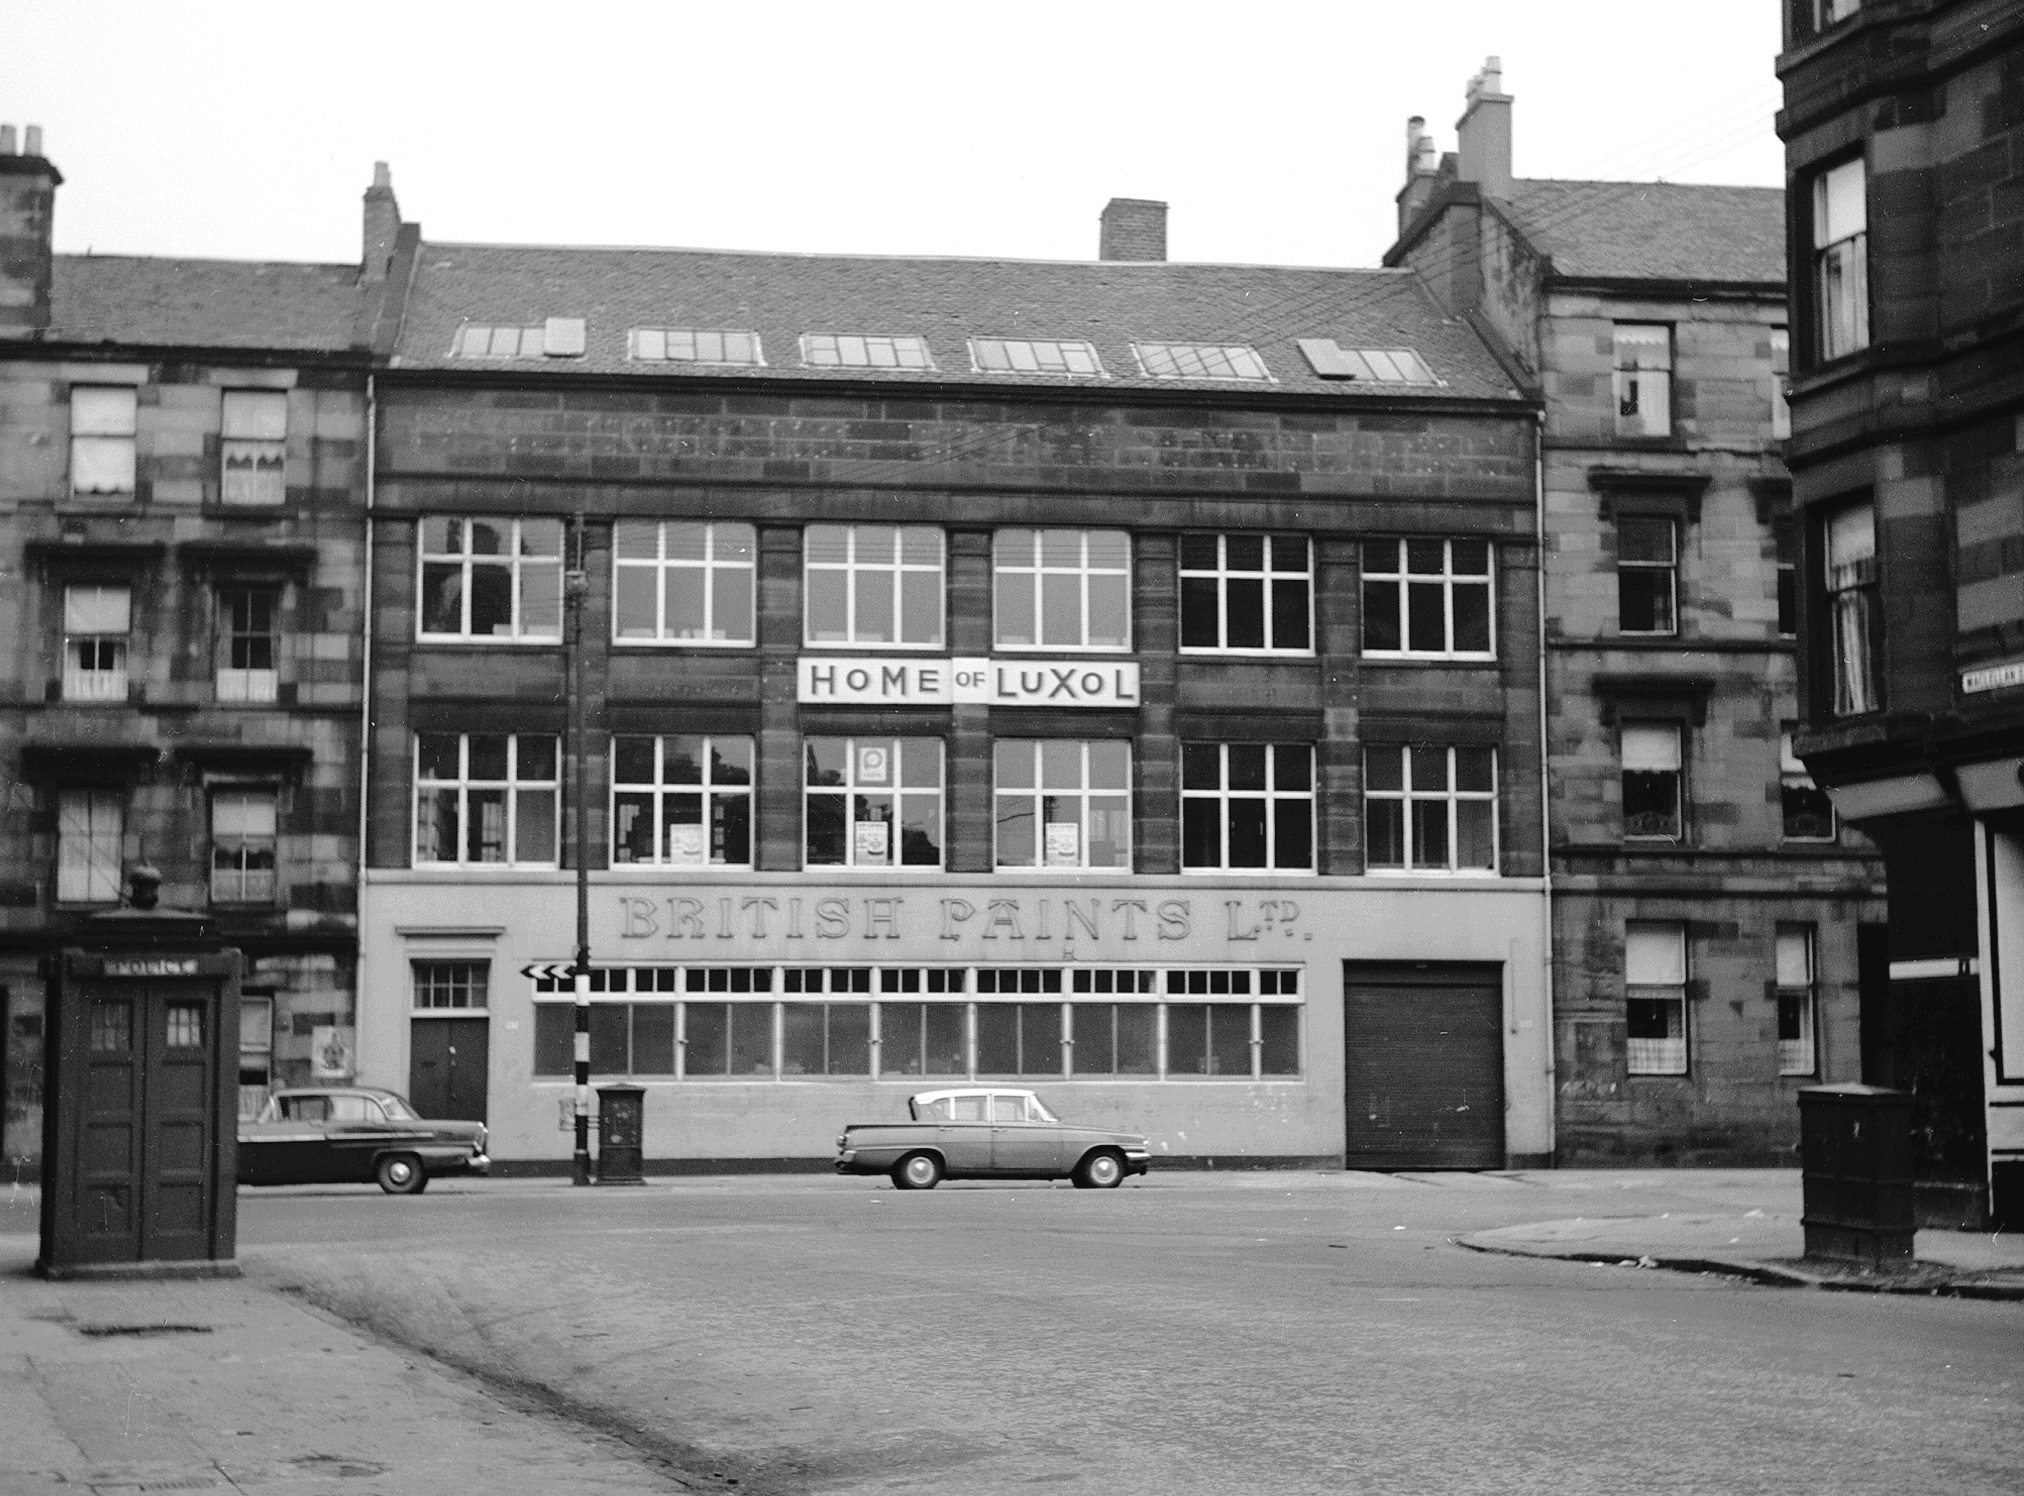 A grainy black and white archive photo from Glasgow in the 60s showing a building with a big sign "British Paints Ltf", some cars and a police box.